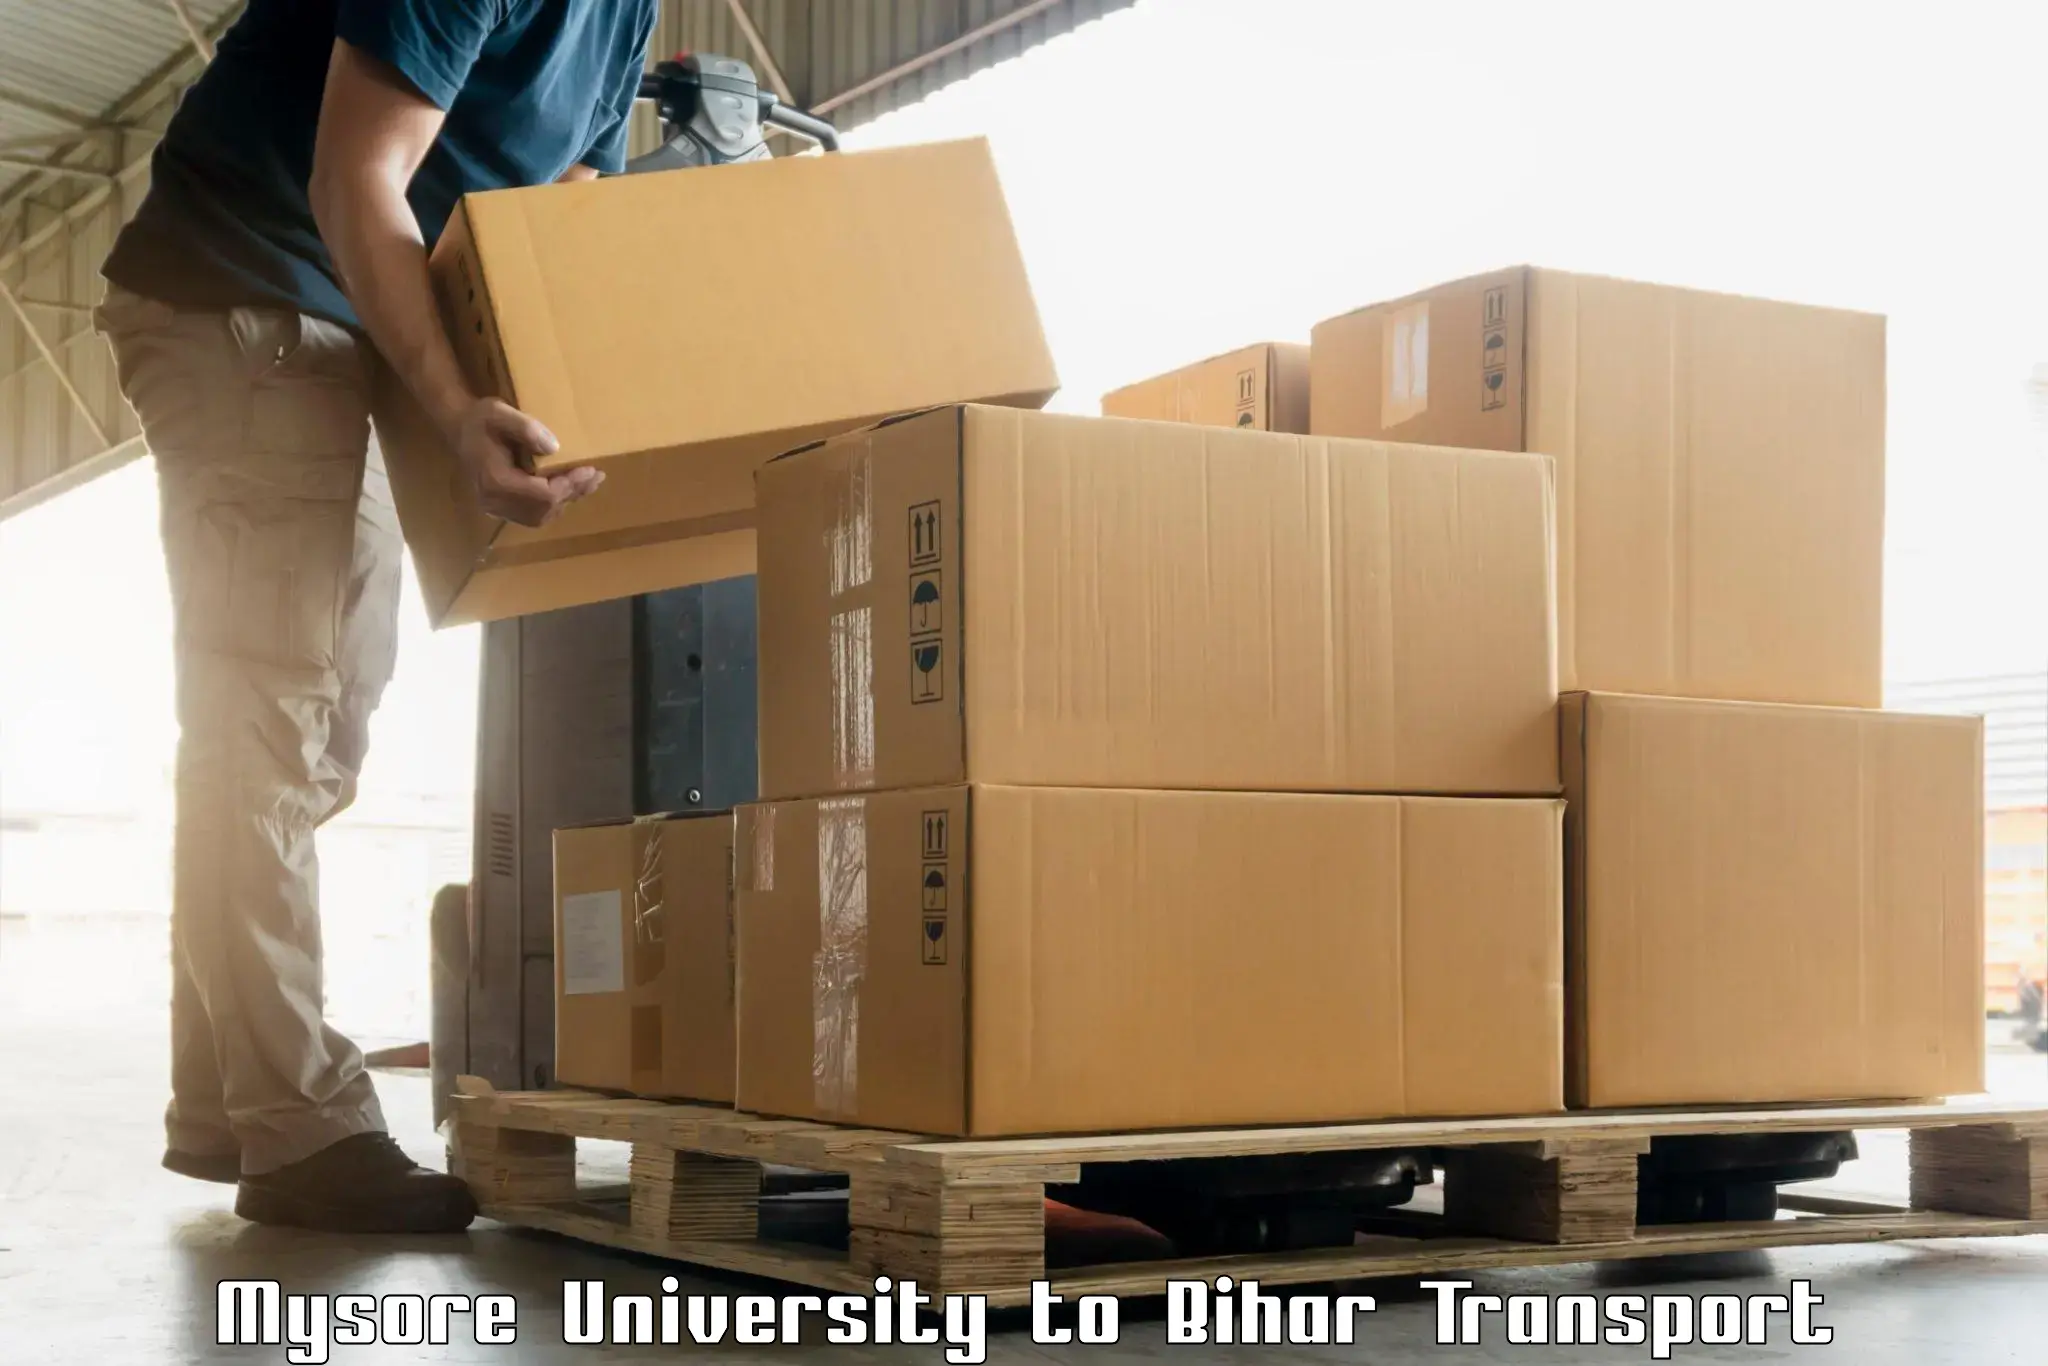 Interstate transport services in Mysore University to Jehanabad